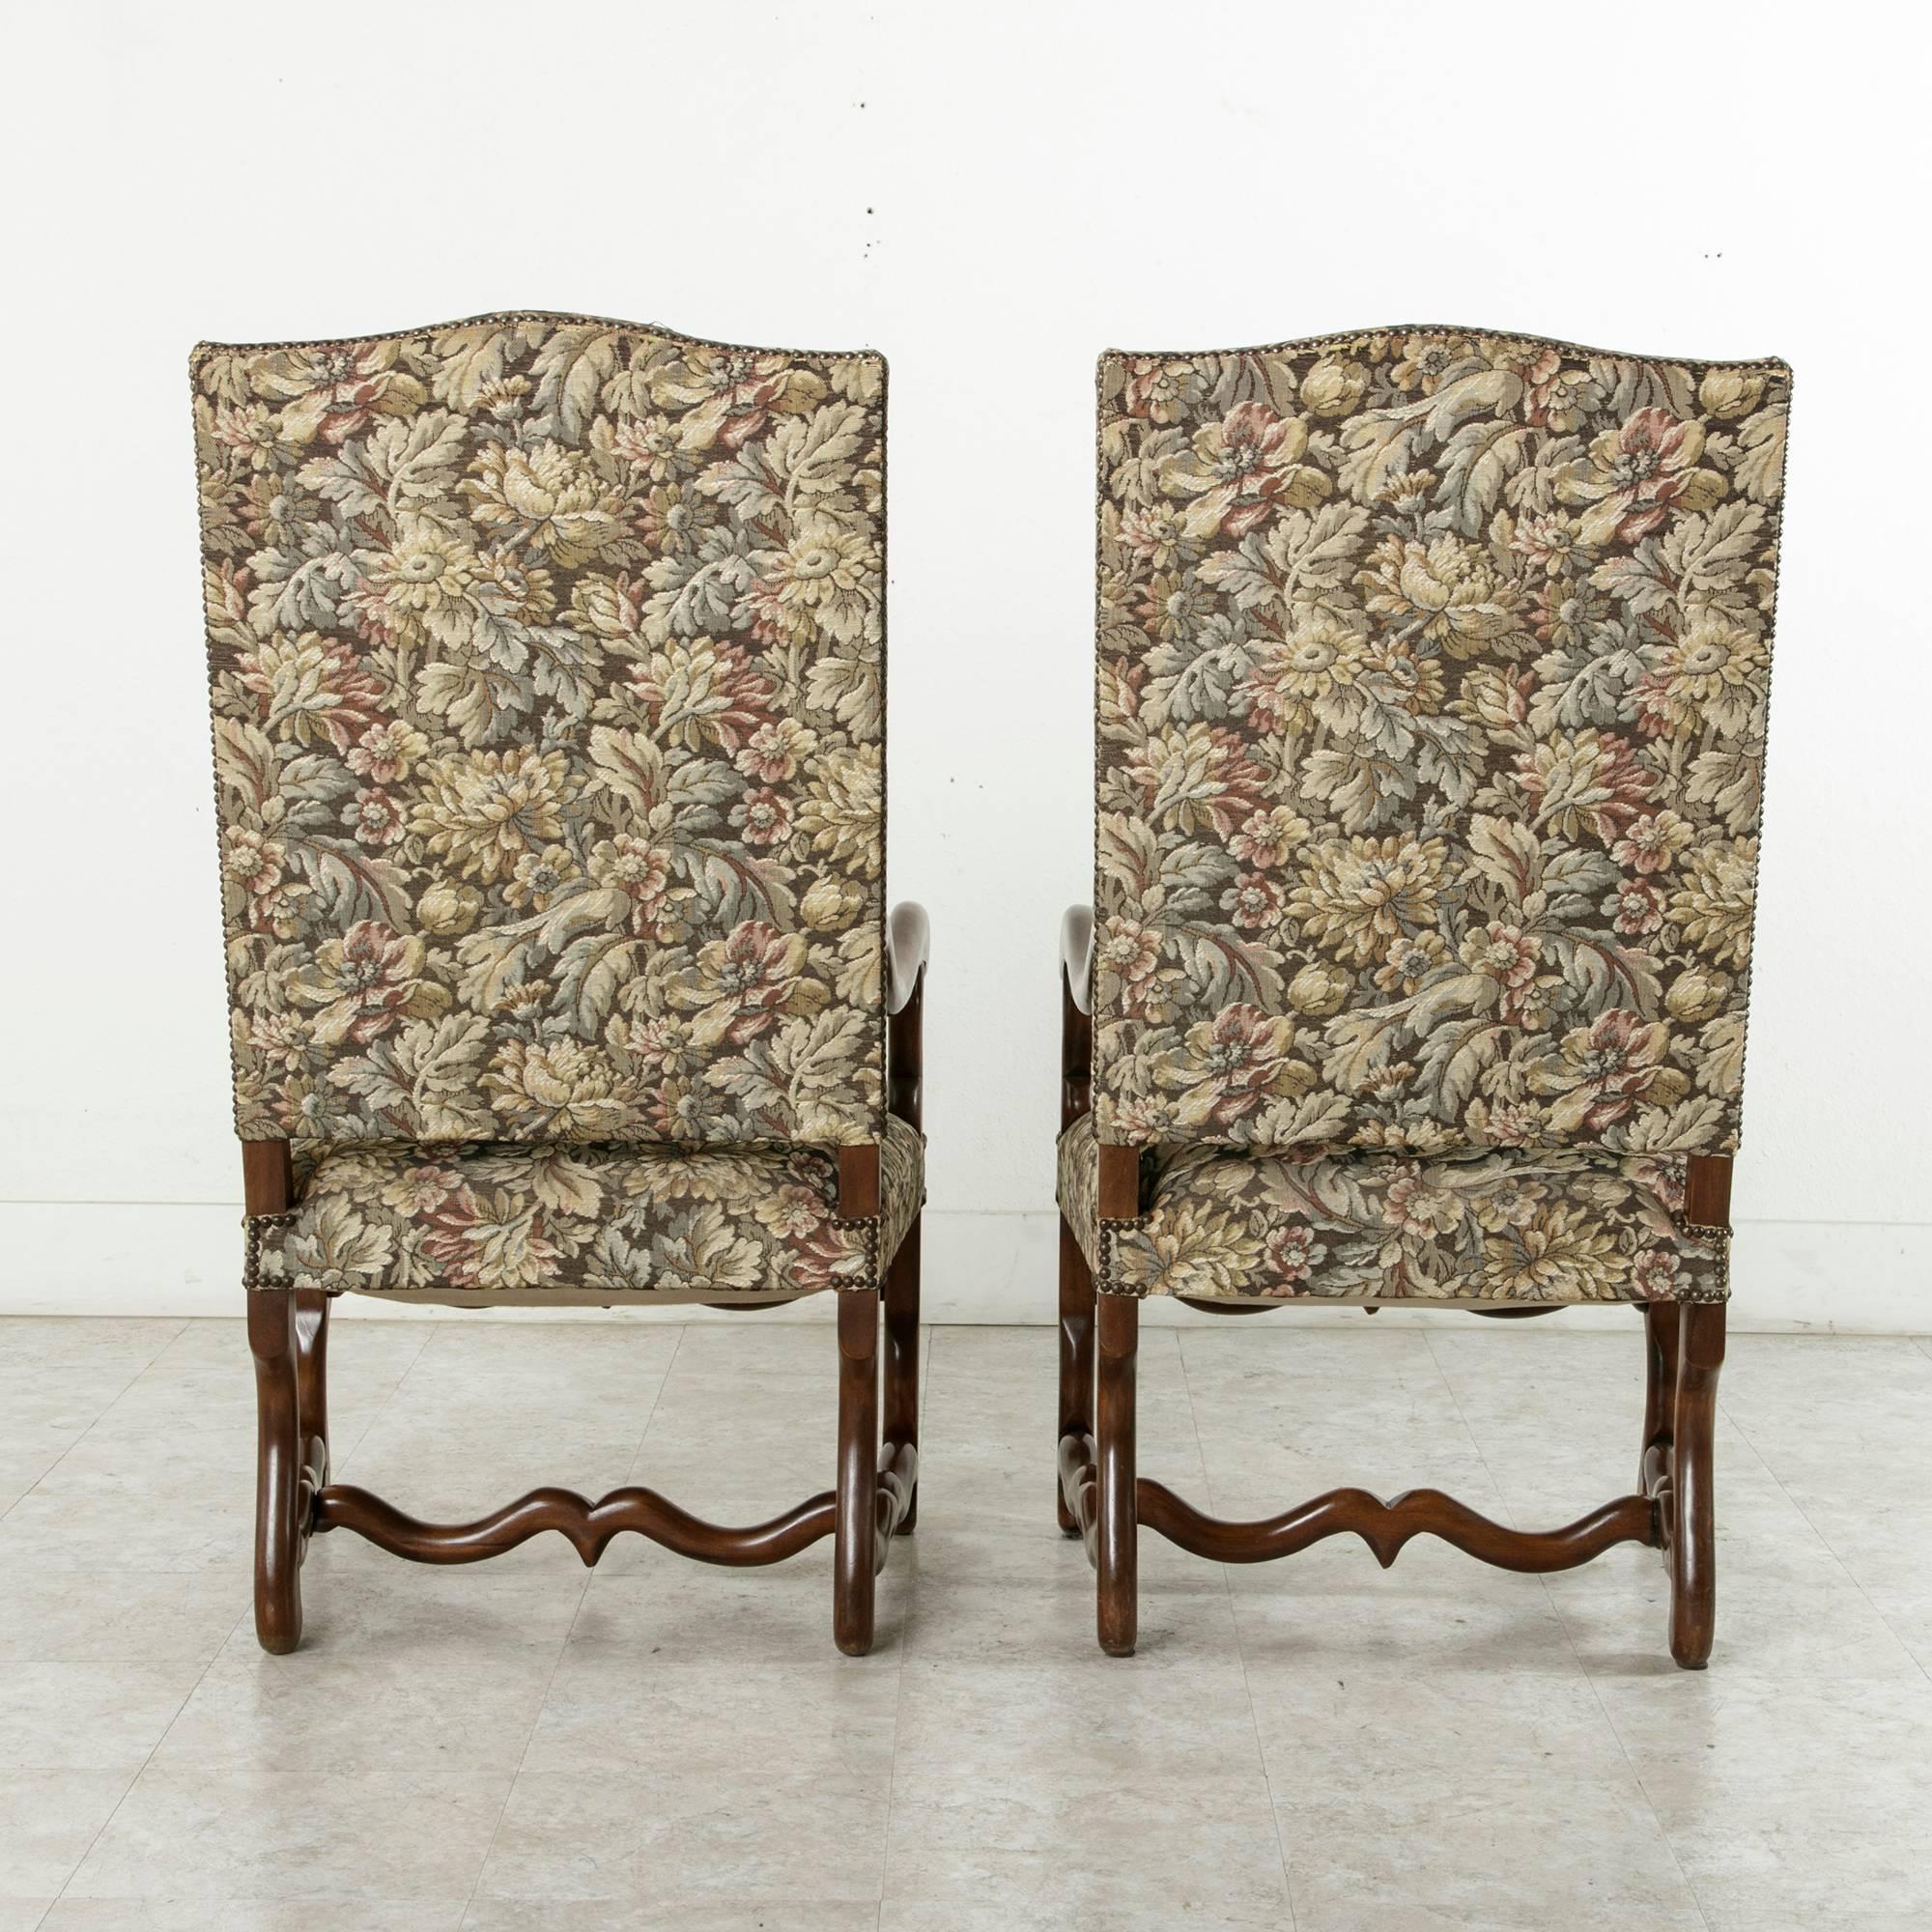 Early 20th Century Pair of Walnut Louis XIV Style Mutton Leg Armchairs with Tapestry, circa 1900